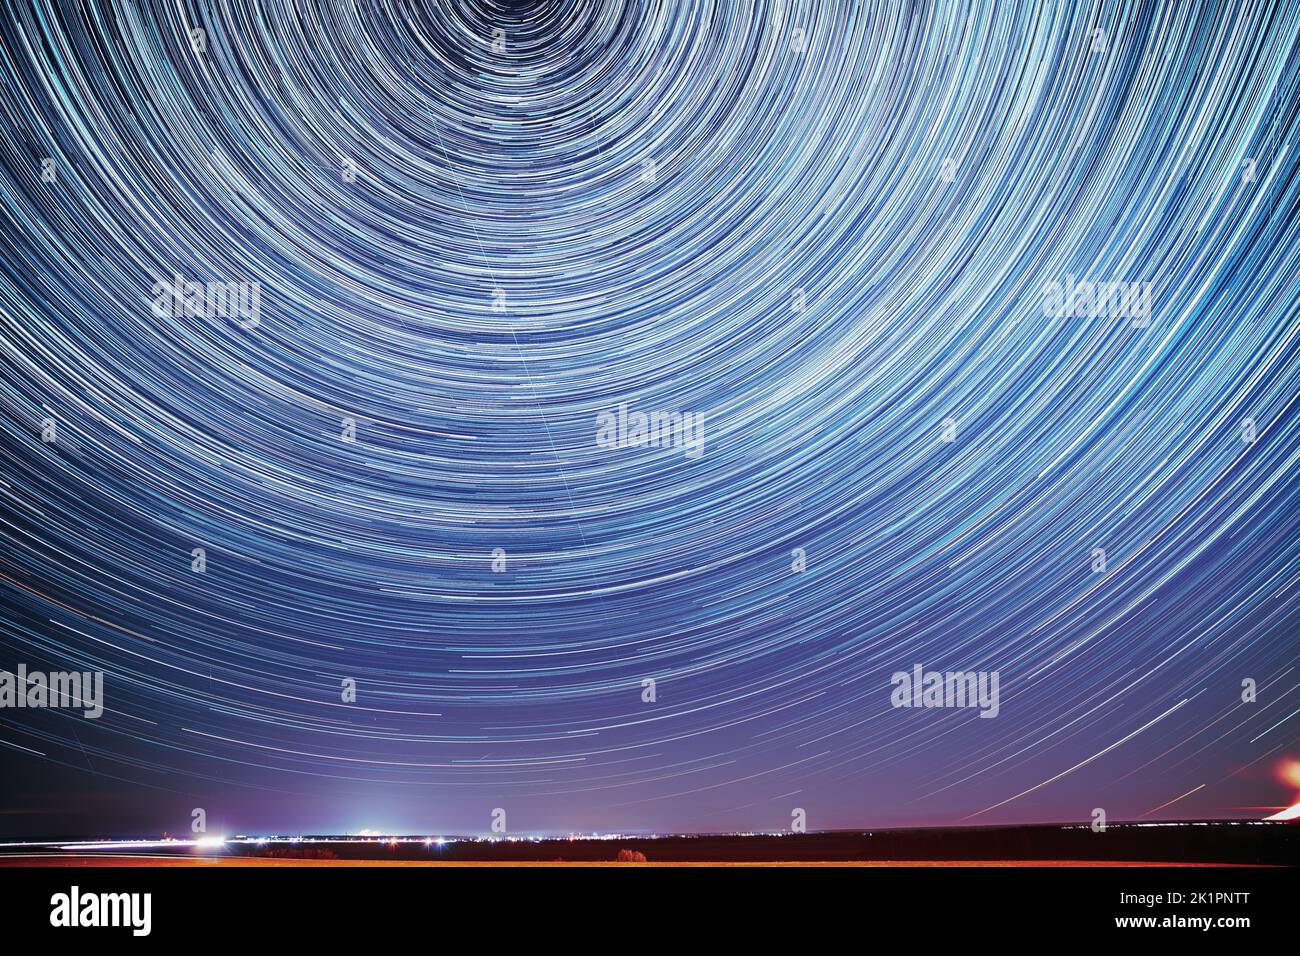 Unusual Amazing Stars Effect In Sky. Trace Of Moon. Spin Of Star And Meteoric Trails On Night Sky. Moonrise Sky Natural Background. Large Exposure Stock Photo